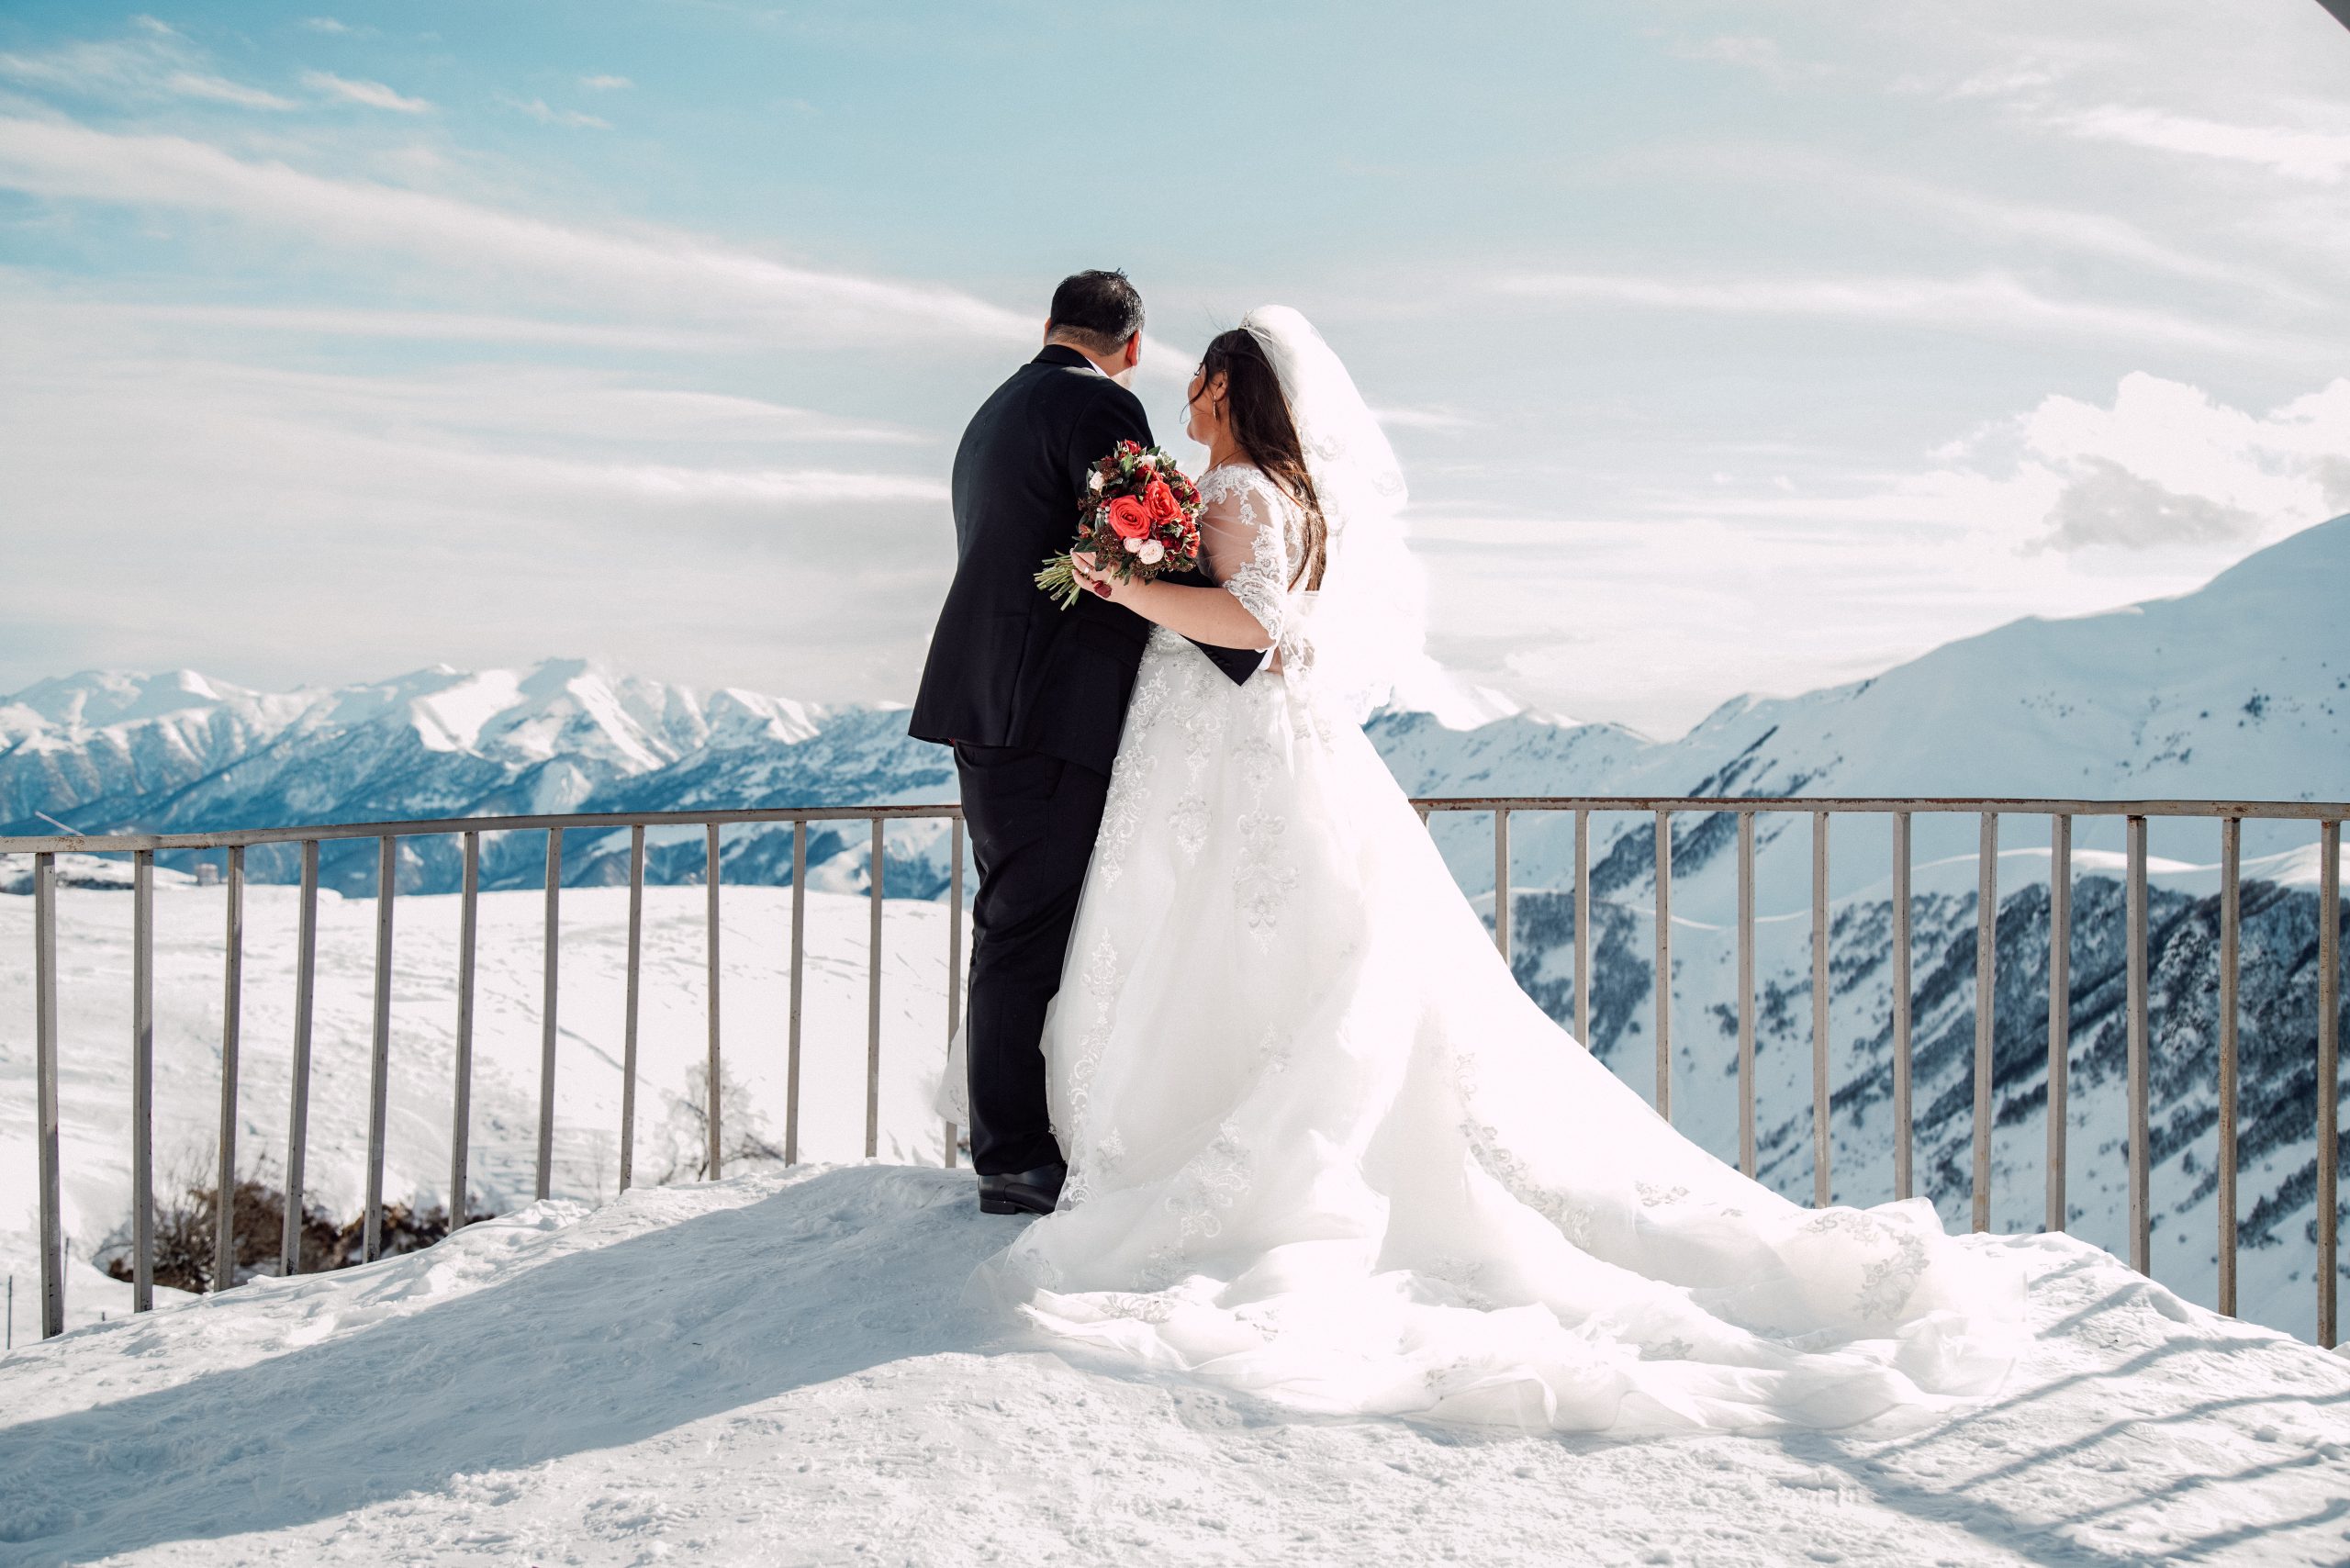 A wedding with a view of the mountains in Georgia